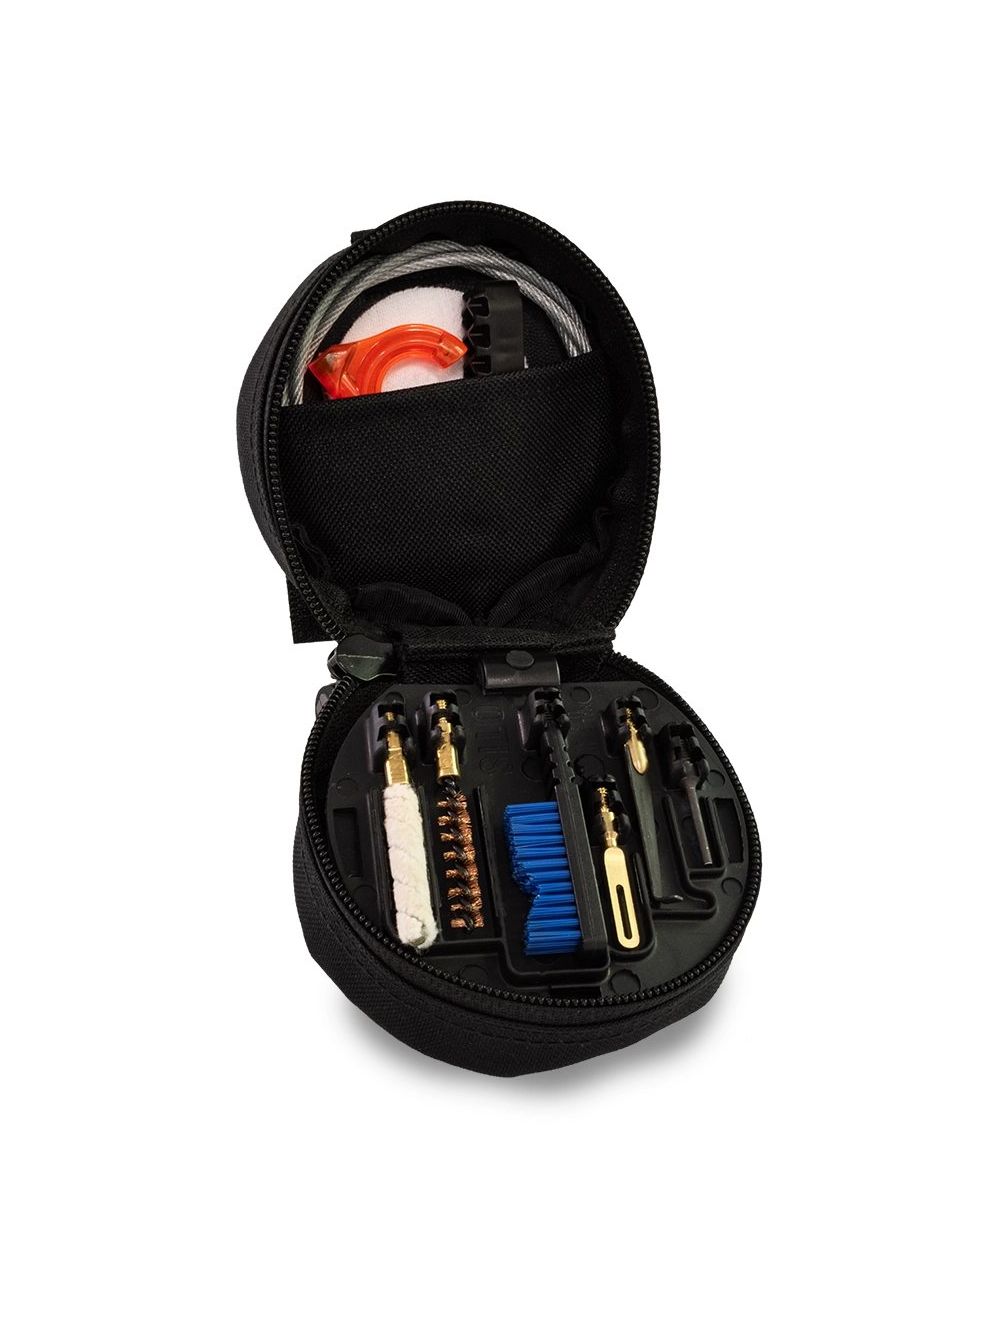 Msr/Ar Cleaning System for .223/ 5.56